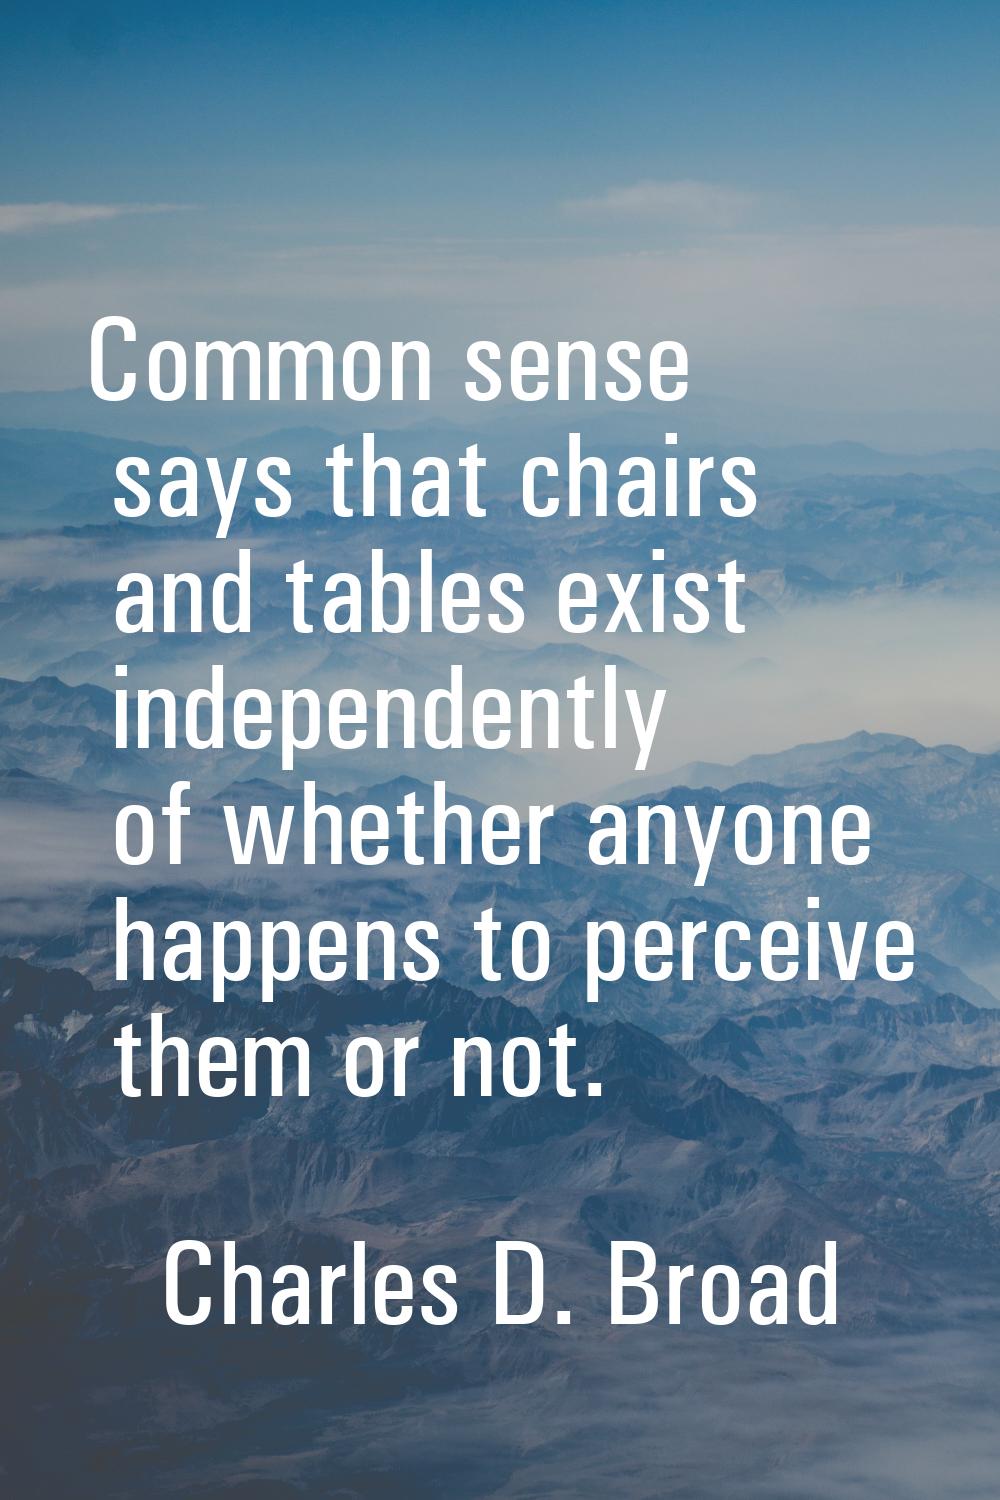 Common sense says that chairs and tables exist independently of whether anyone happens to perceive 